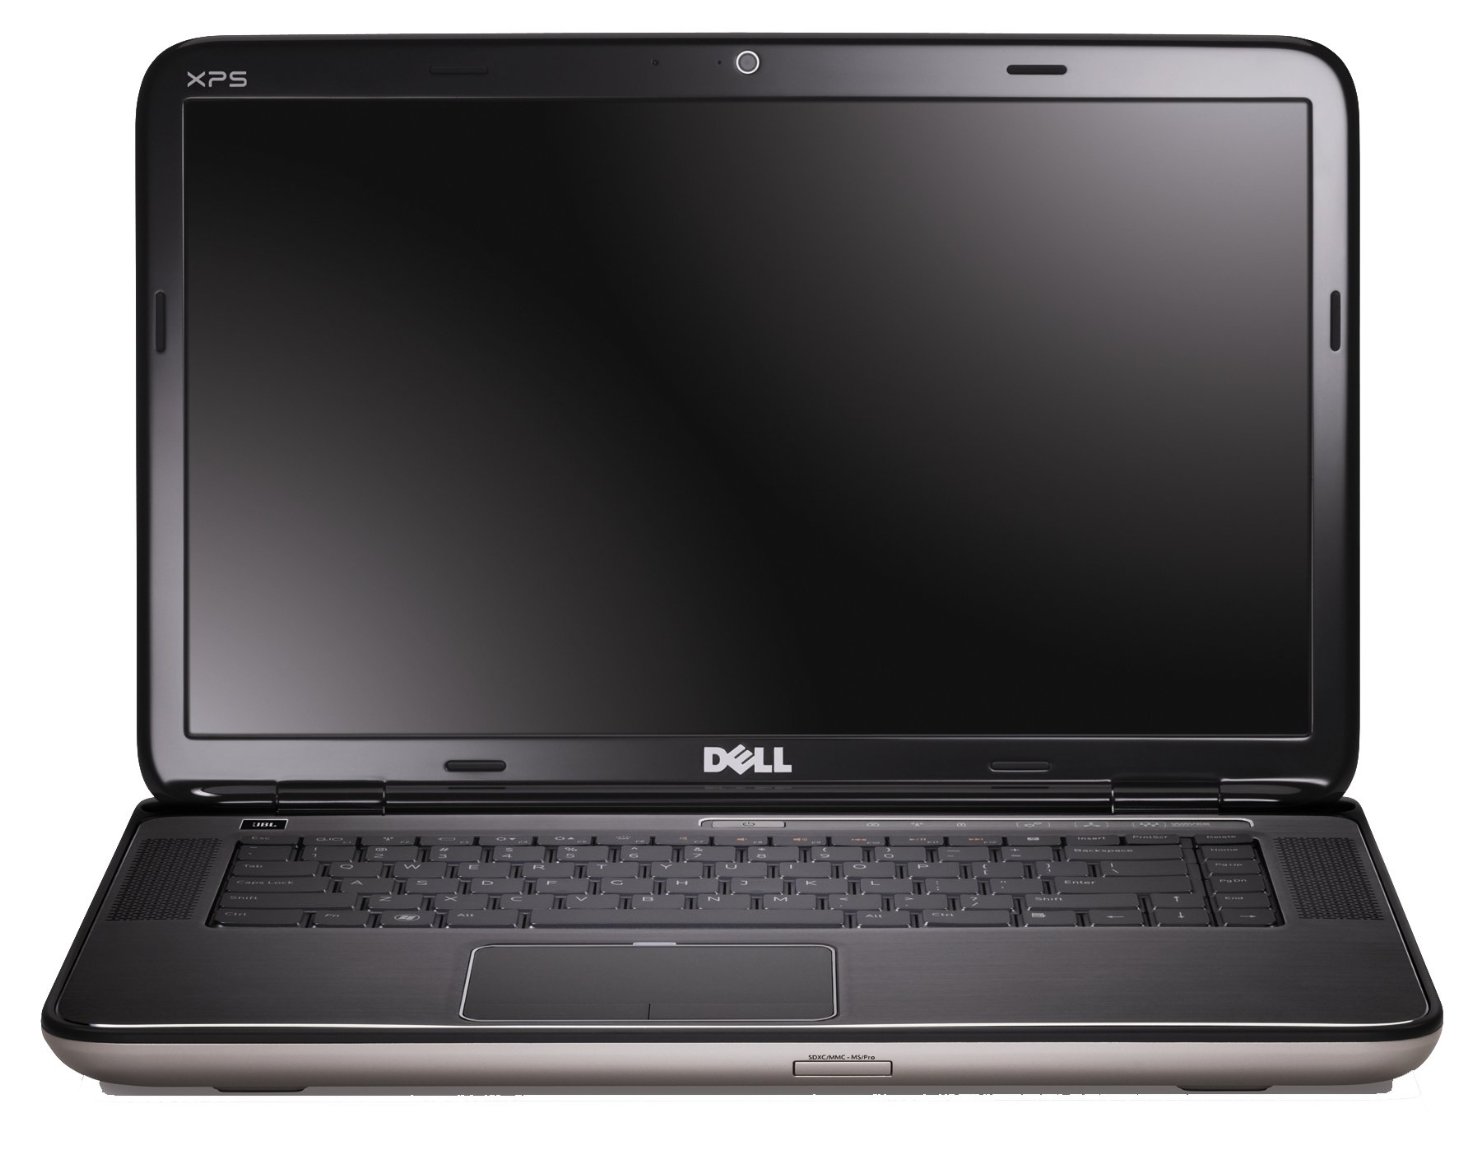   Dell XPS 15 (9570-6658)  1